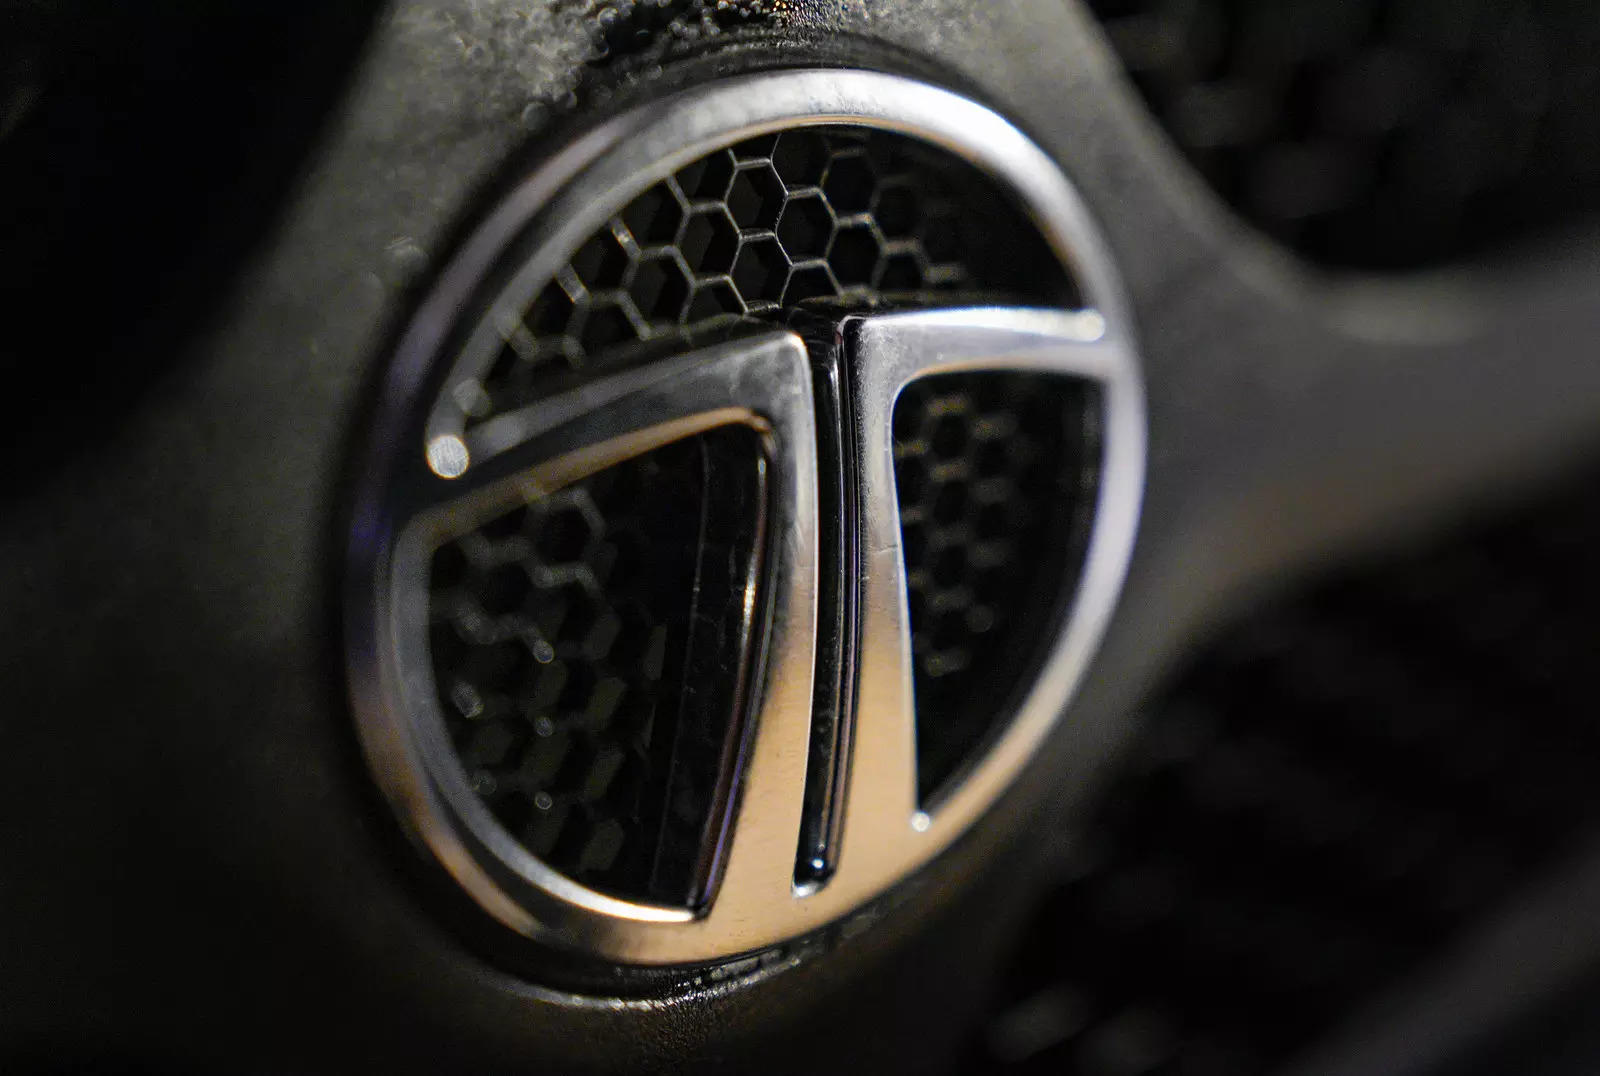 Tata Motors quarterly results: With Q3 FY23 earnings, auto giant revs up first profit in 2 years; check profit after tax, other details